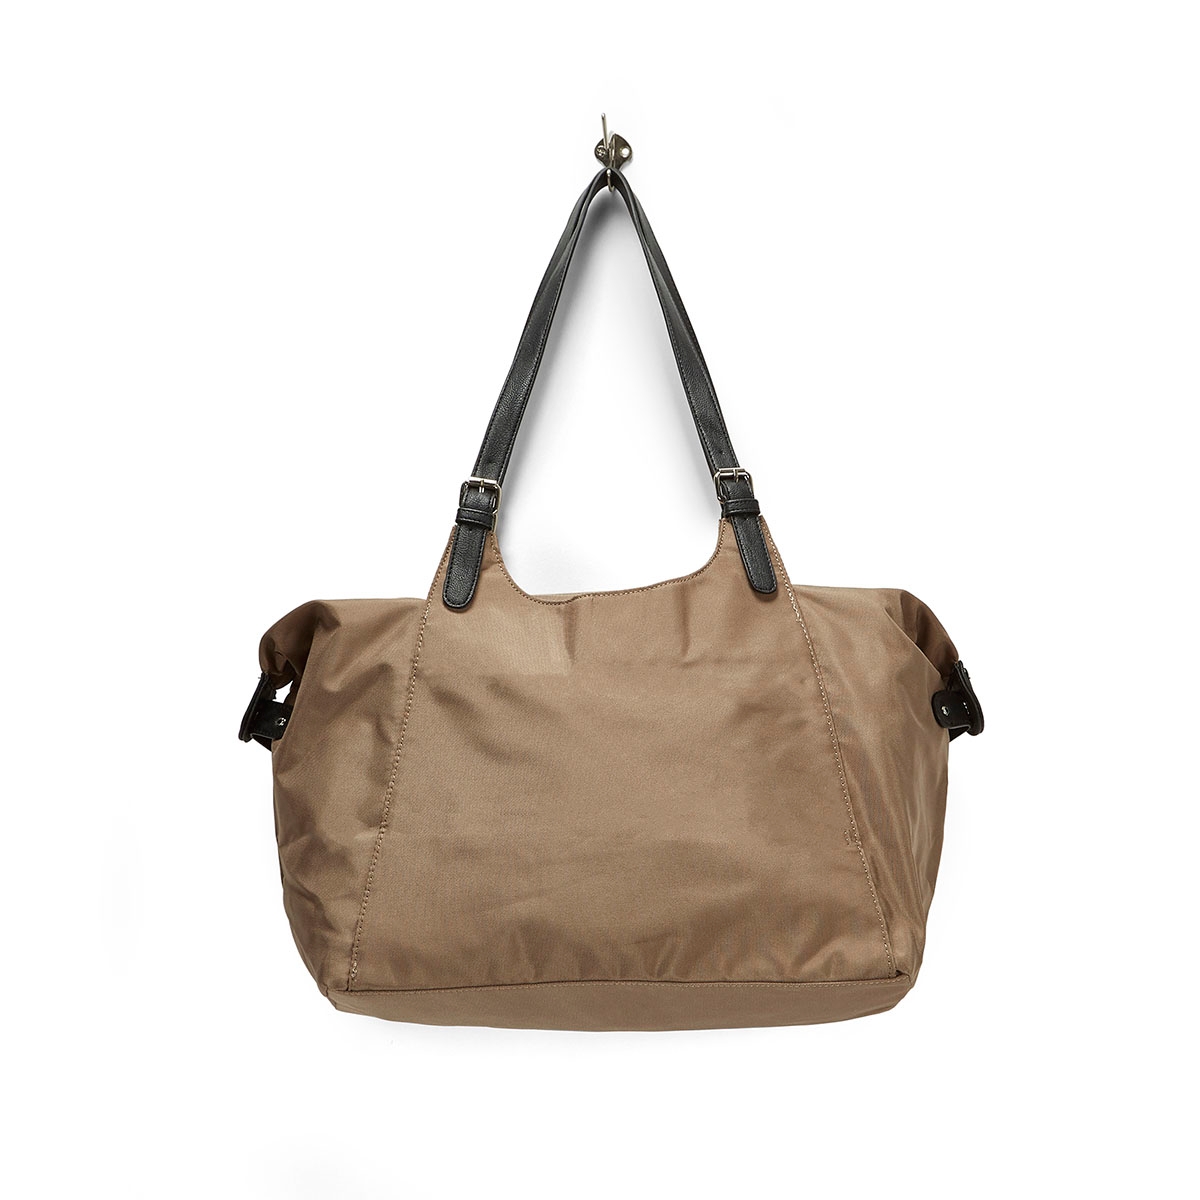 Women's R4700 Roots73 taupe large tote bag